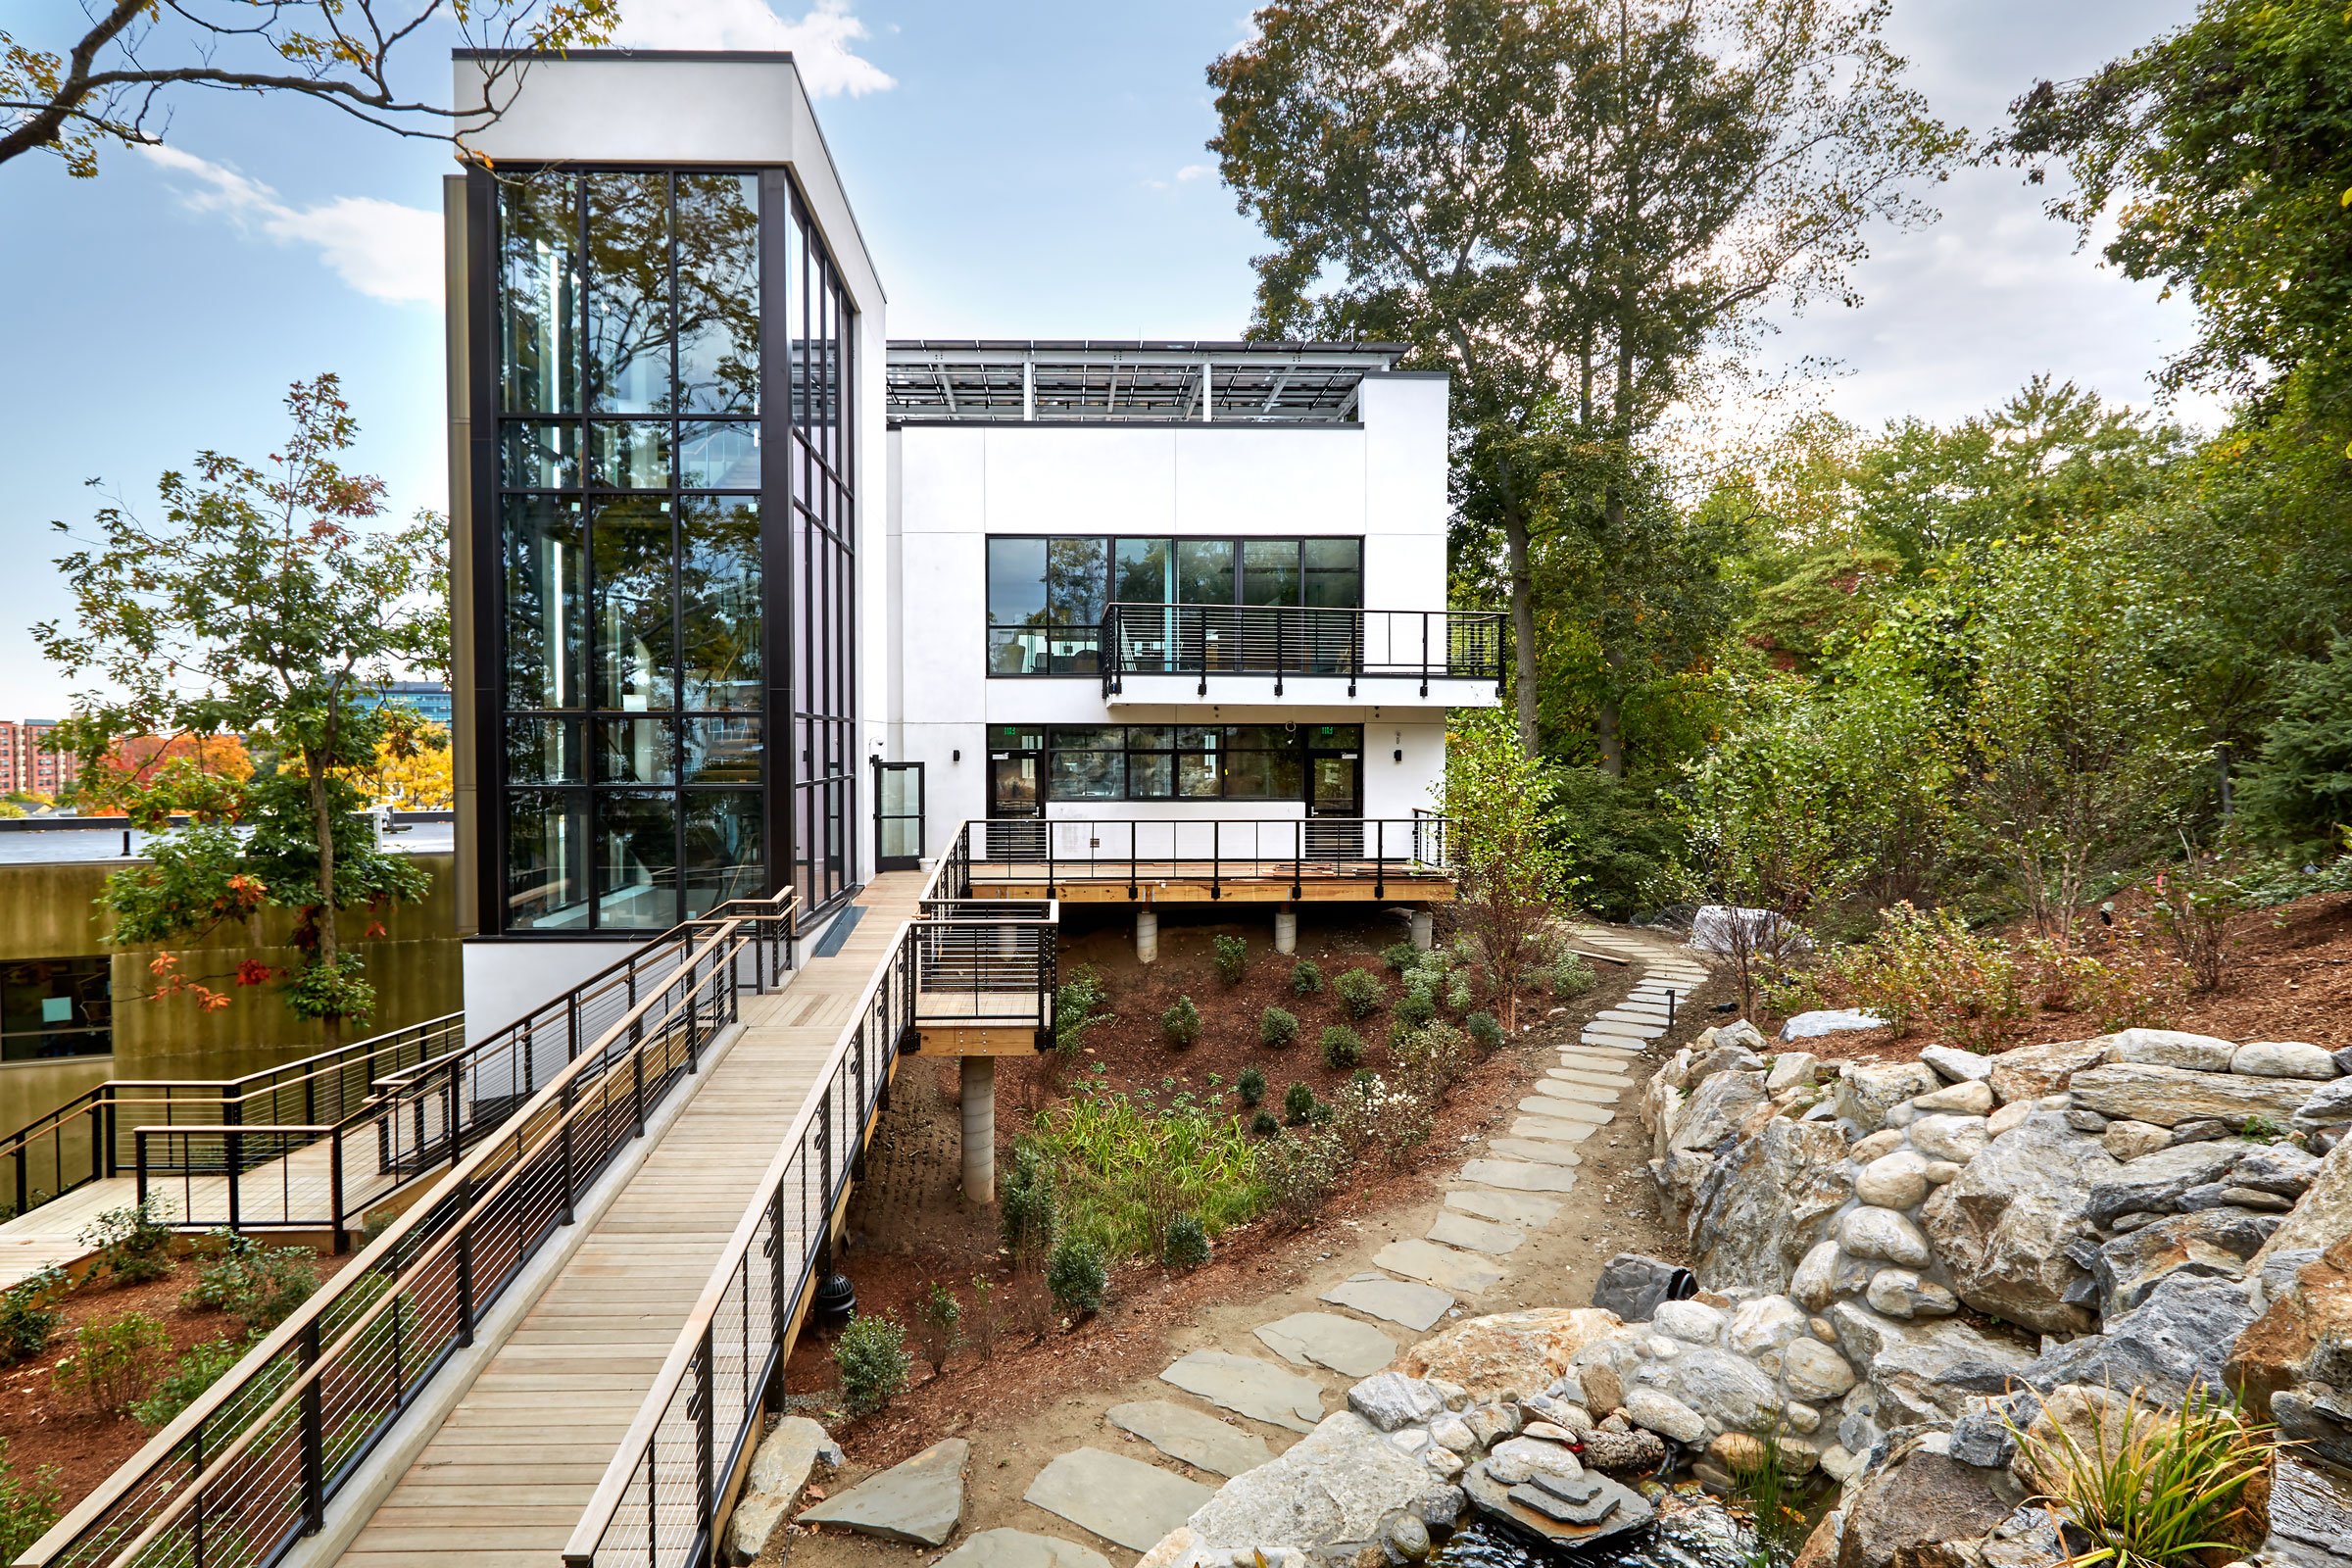 HMTX World Headquarters is the Incredible, Sustainable House on the Hill